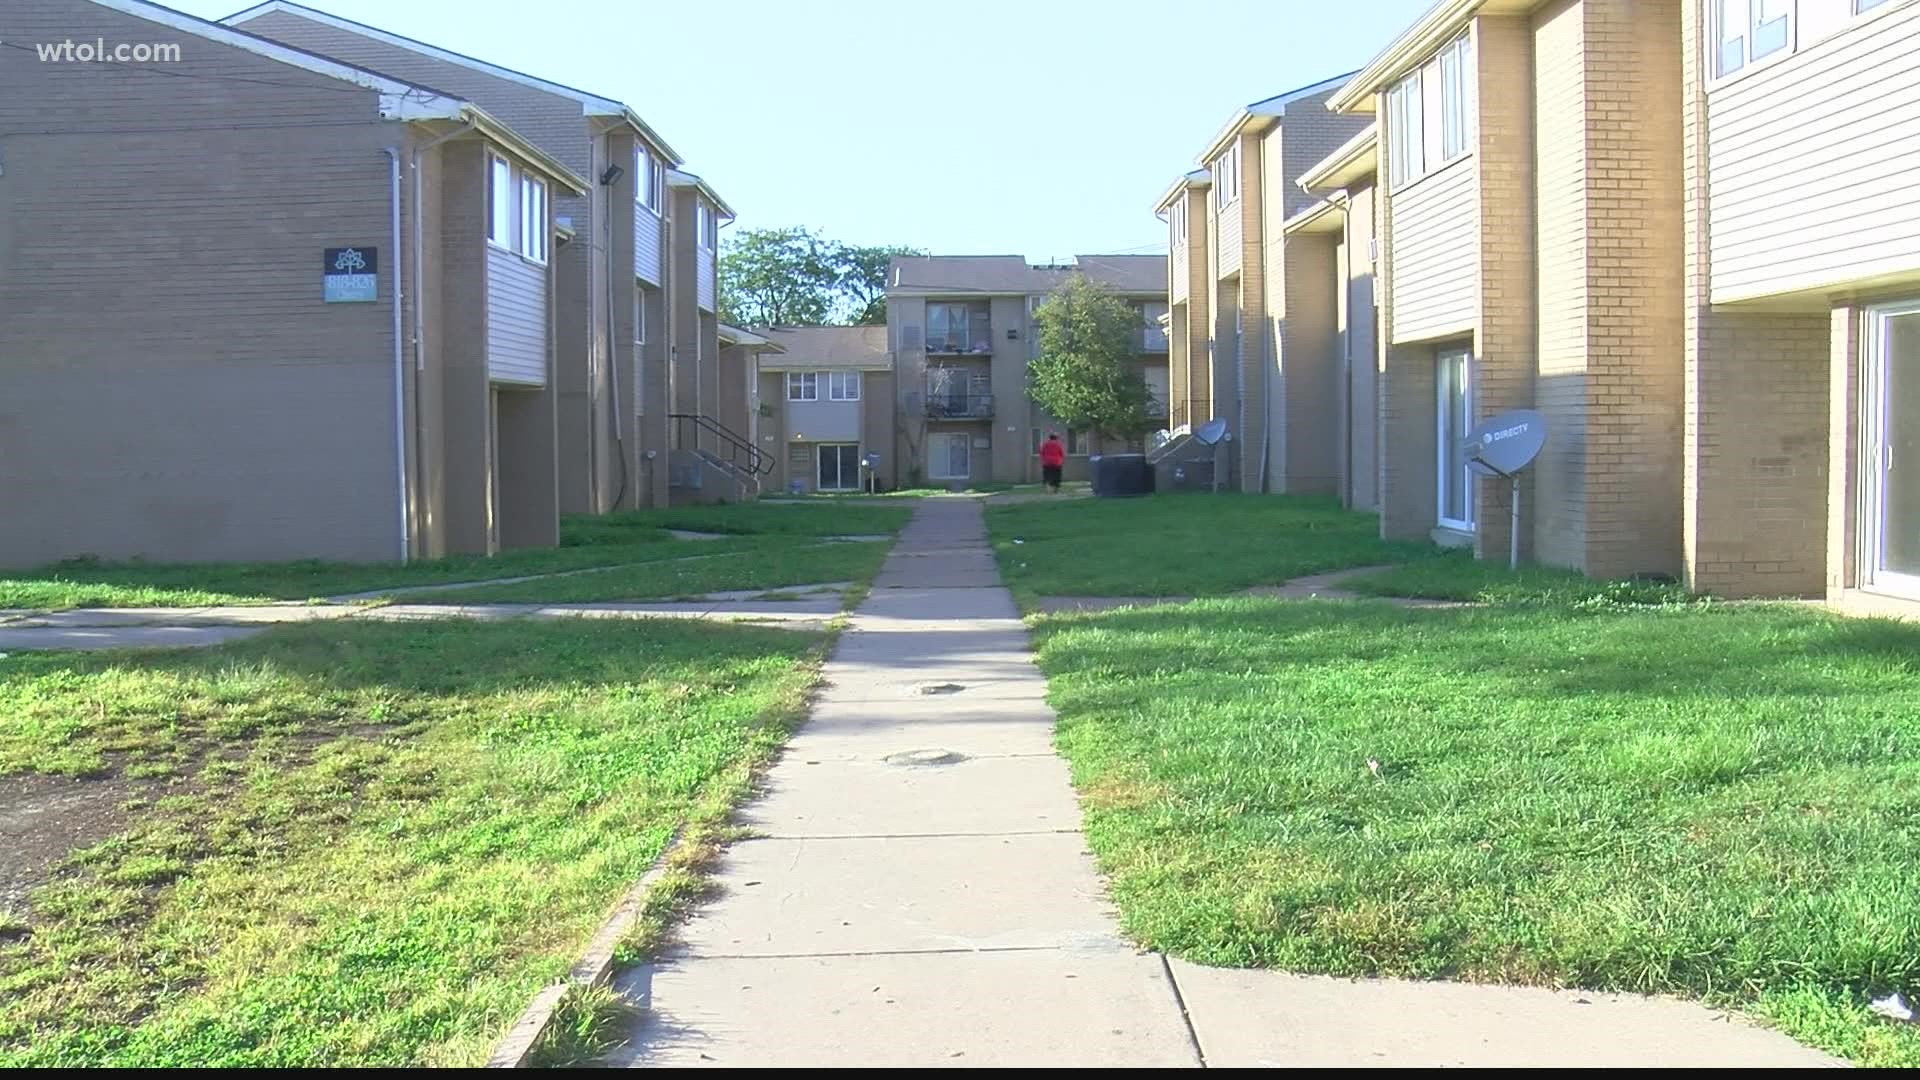 Every tenant WTOL spoke with said they have issues with mice, cockroaches, bedbugs or a combination.